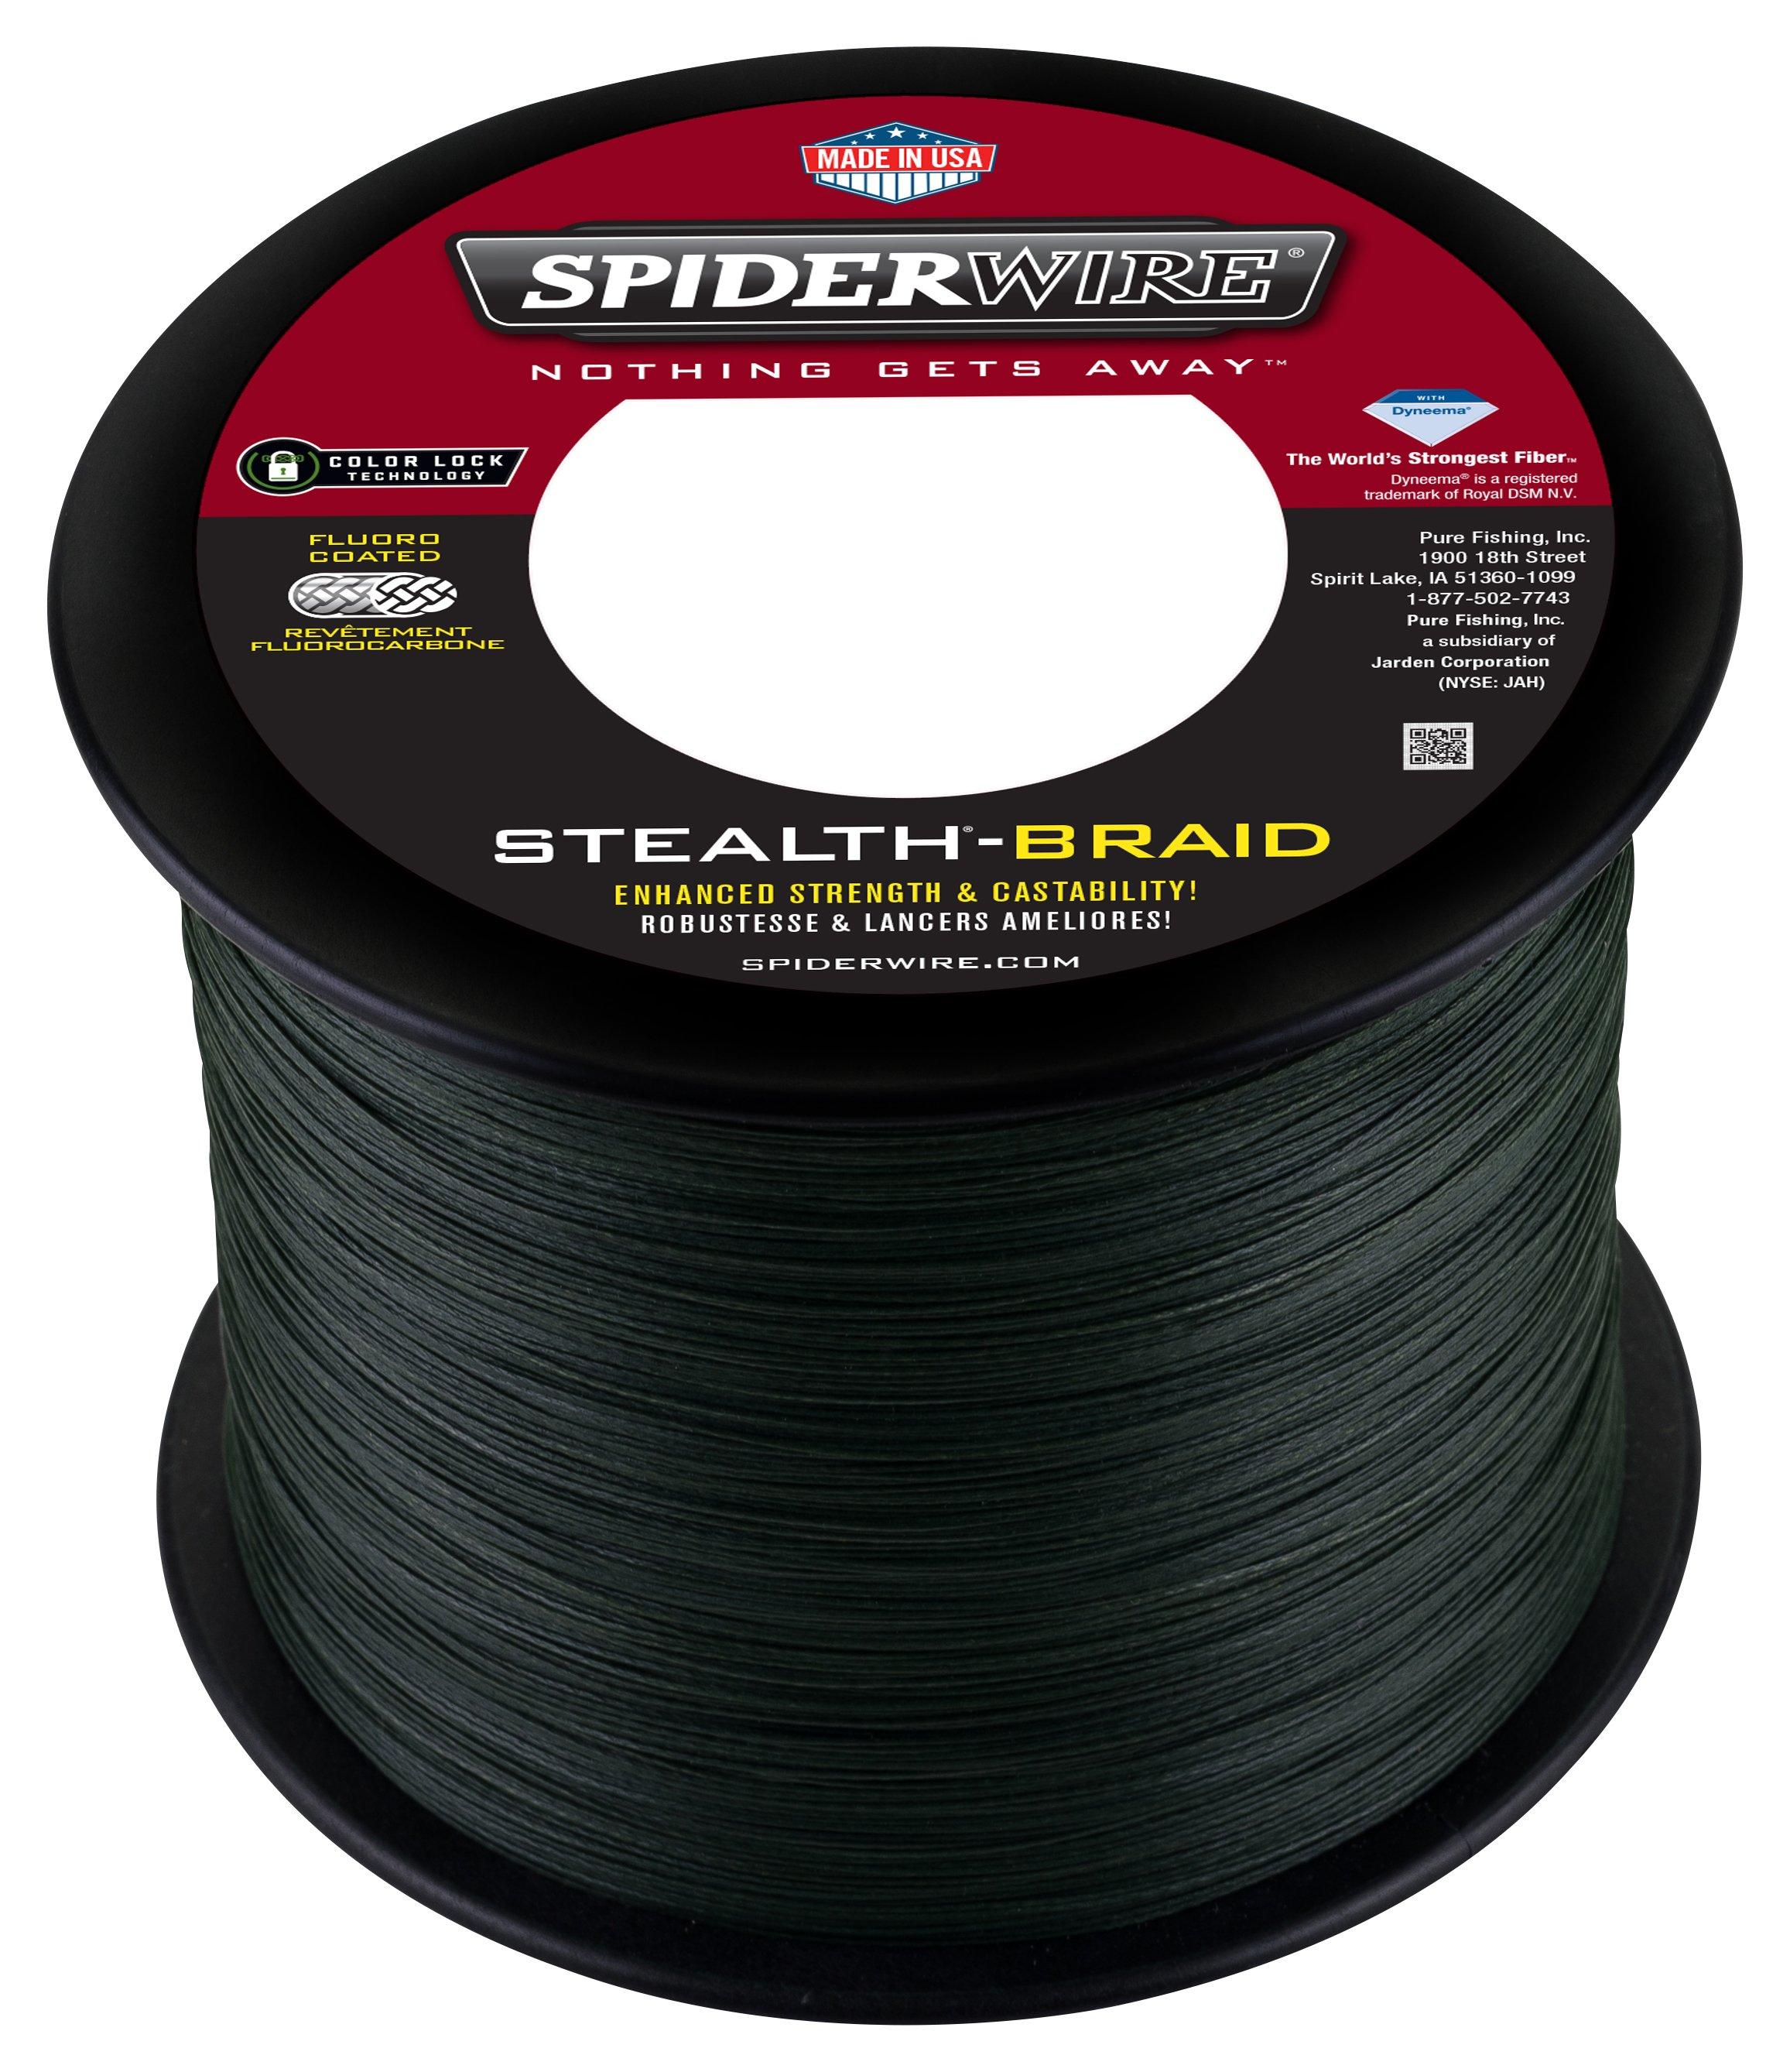 SpiderWire Stealth Superline, Blue Camo, 15lb6.8kg, 125yd114m Braided  Fishing Line, Suitable For Saltwater And Freshwater Environments